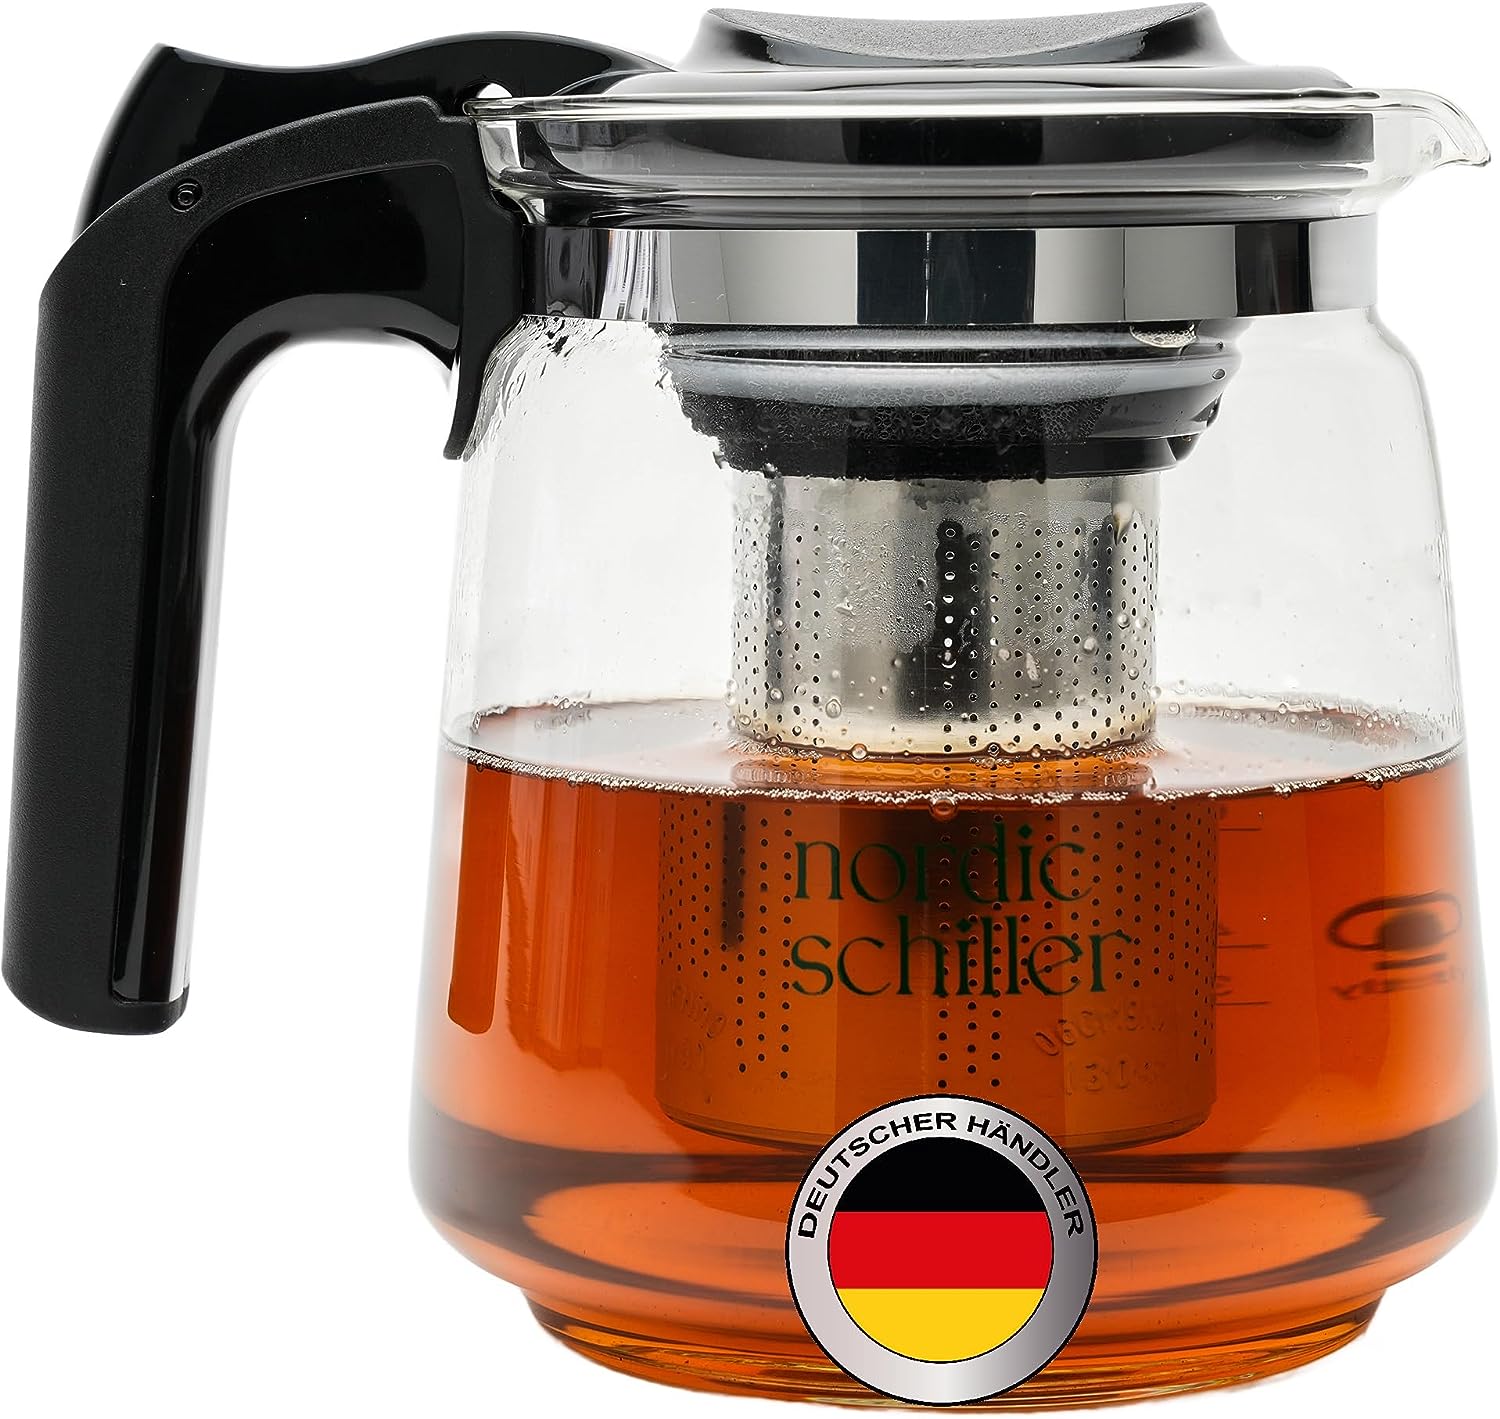 NORDIC SCHILLER Premium Glass Teapot, Heat Resistant Glass Jug with Lid, 1.5 Litre Teapot with Strainer Insert, Thermal Teapot with Stainless Steel Filter Strainer, Tea Maker, Teapot with Strainer Tea